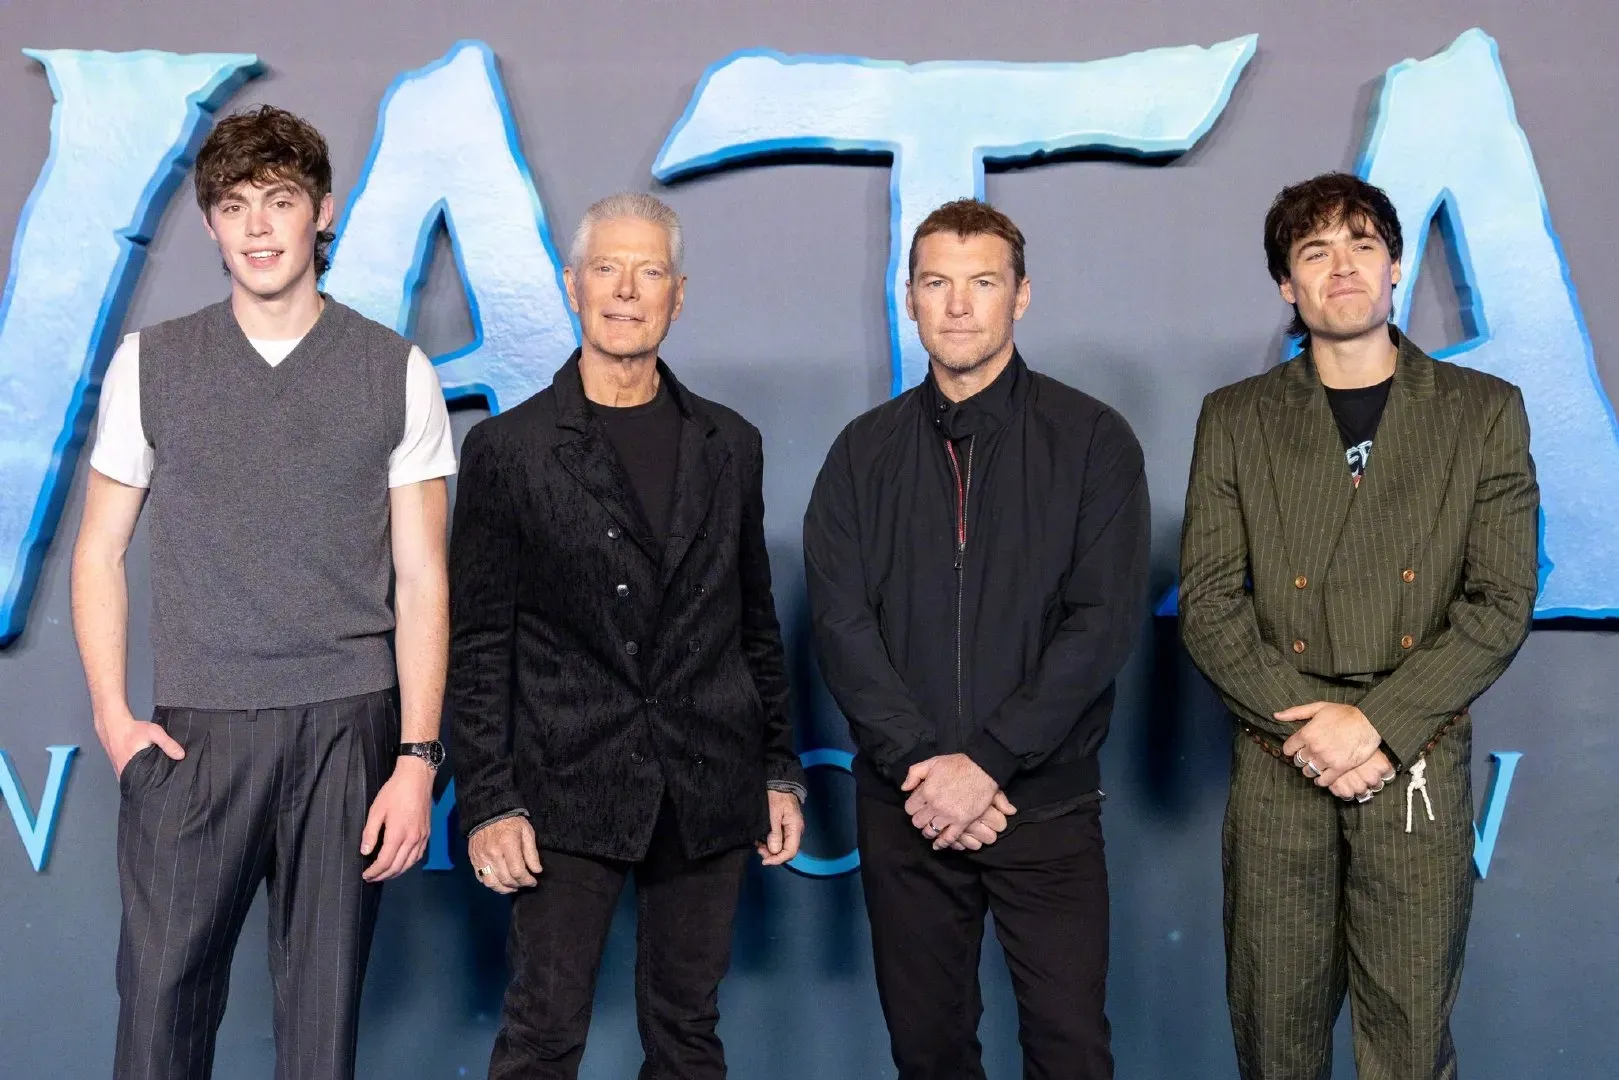 'Avatar: The Way of Water' held its world premiere in London, England, and the cast and crew appeared | FMV6